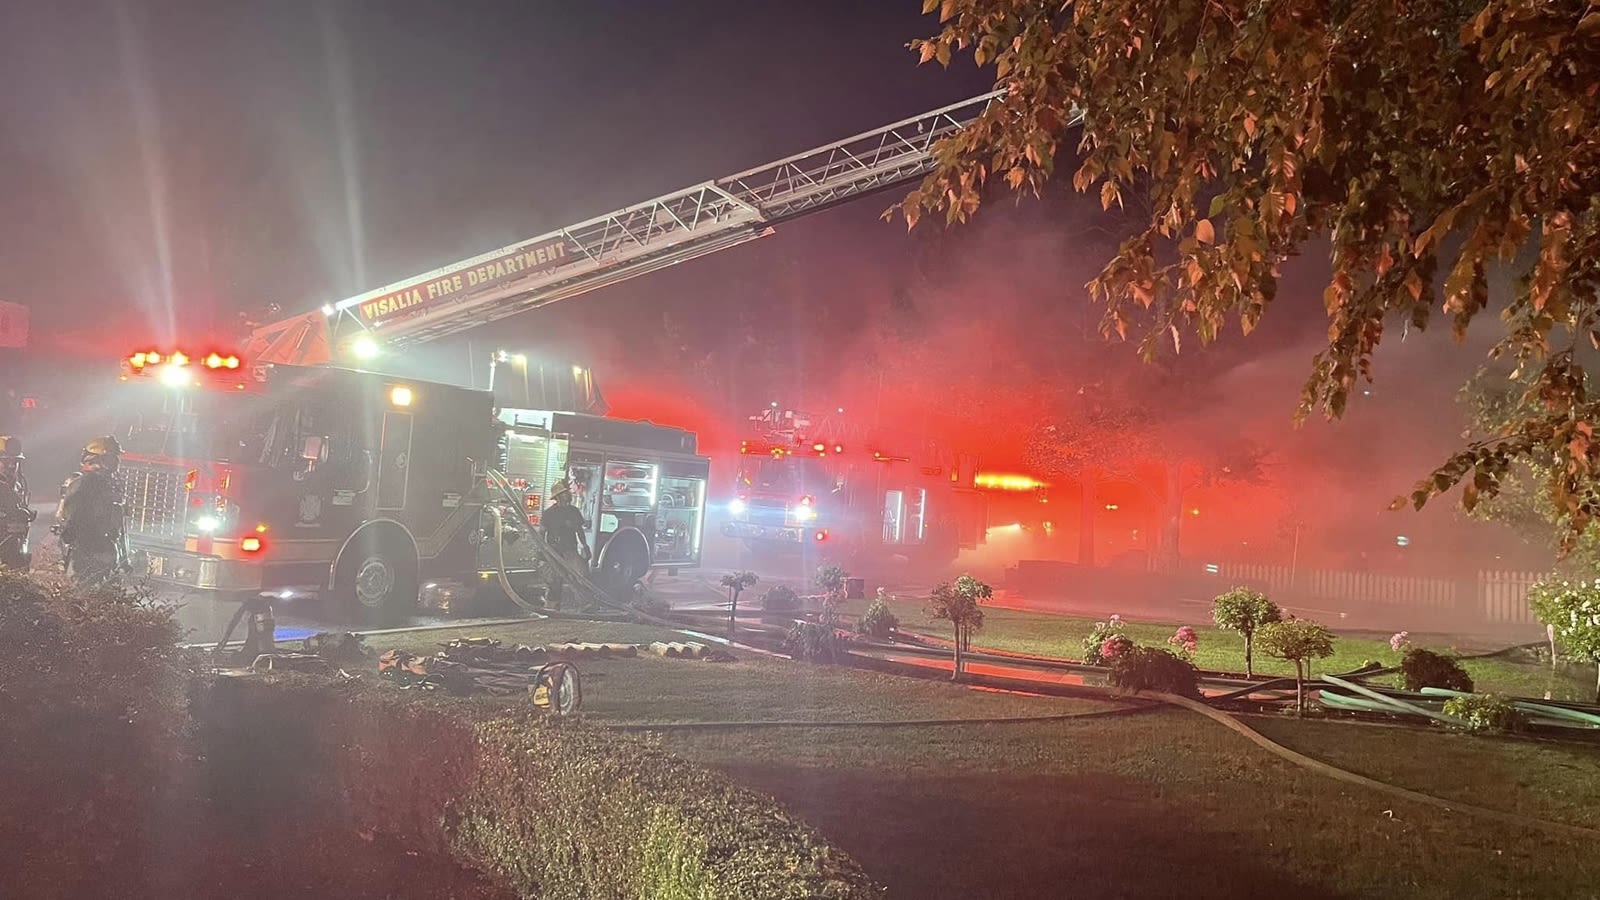 Firefighters working to contain house fire in Visalia neighborhood